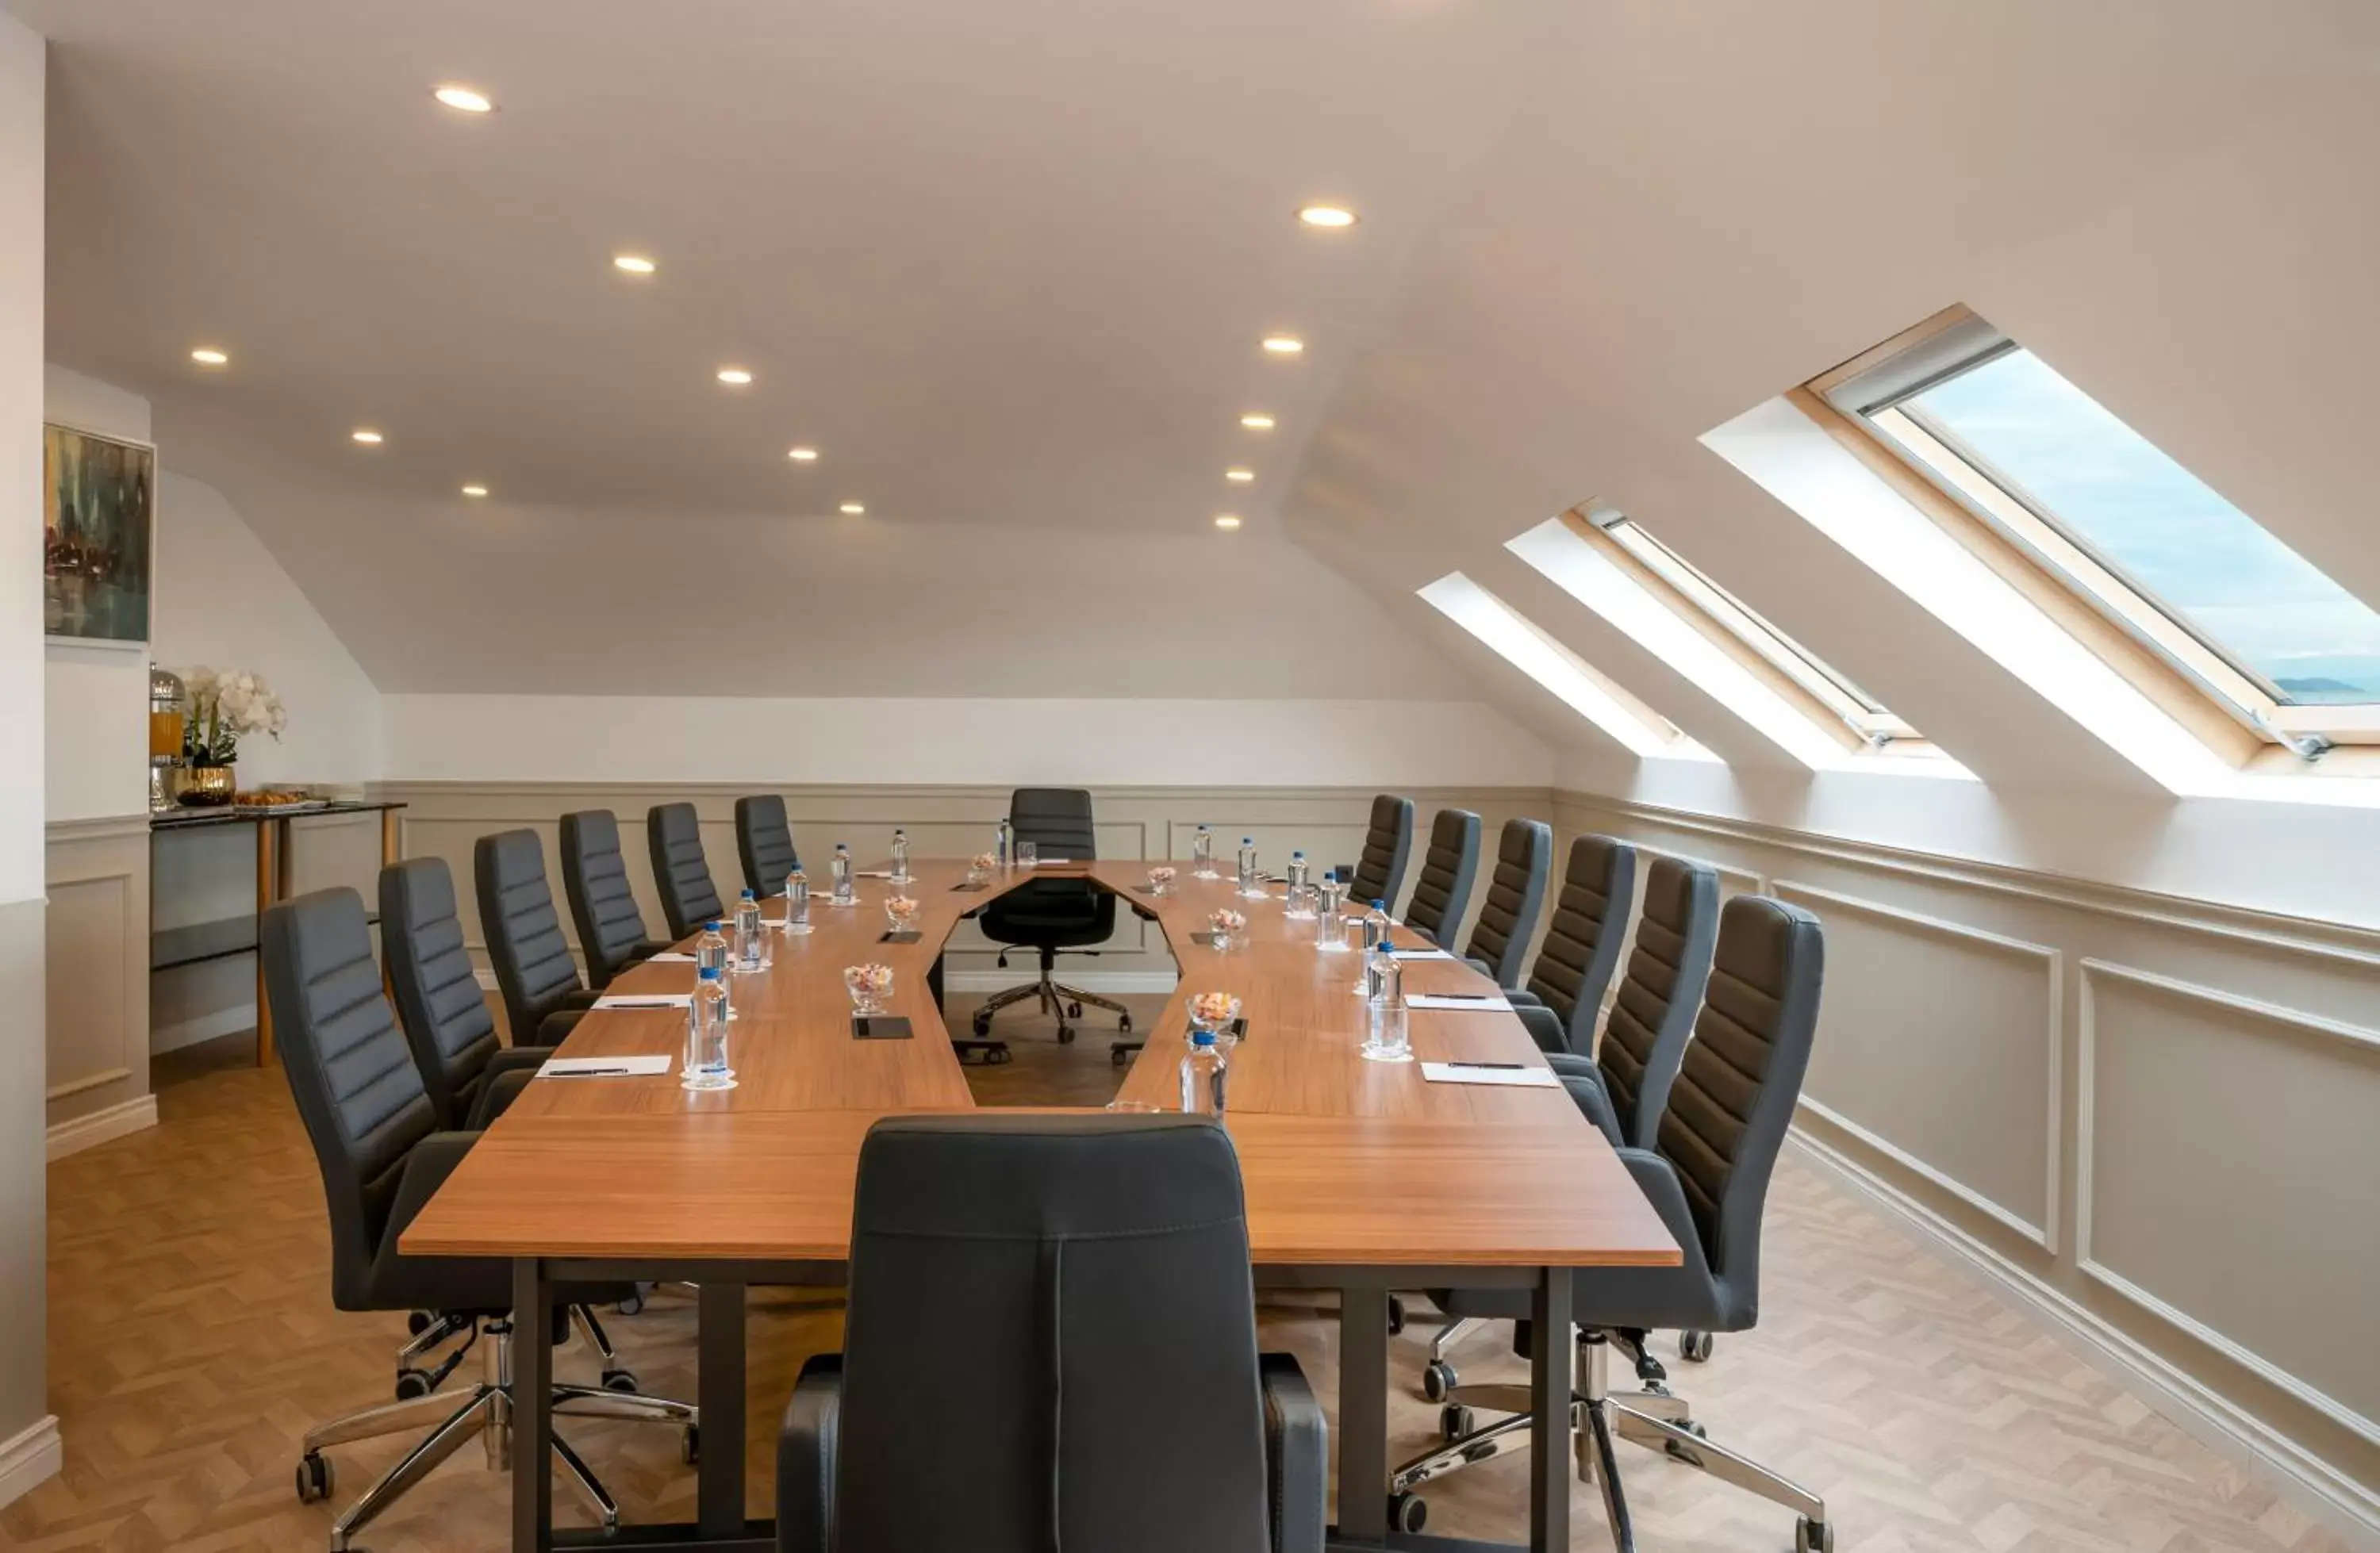 Meeting/conference room in Royan Hotel Hagia Sophia, a member of Radisson Individuals